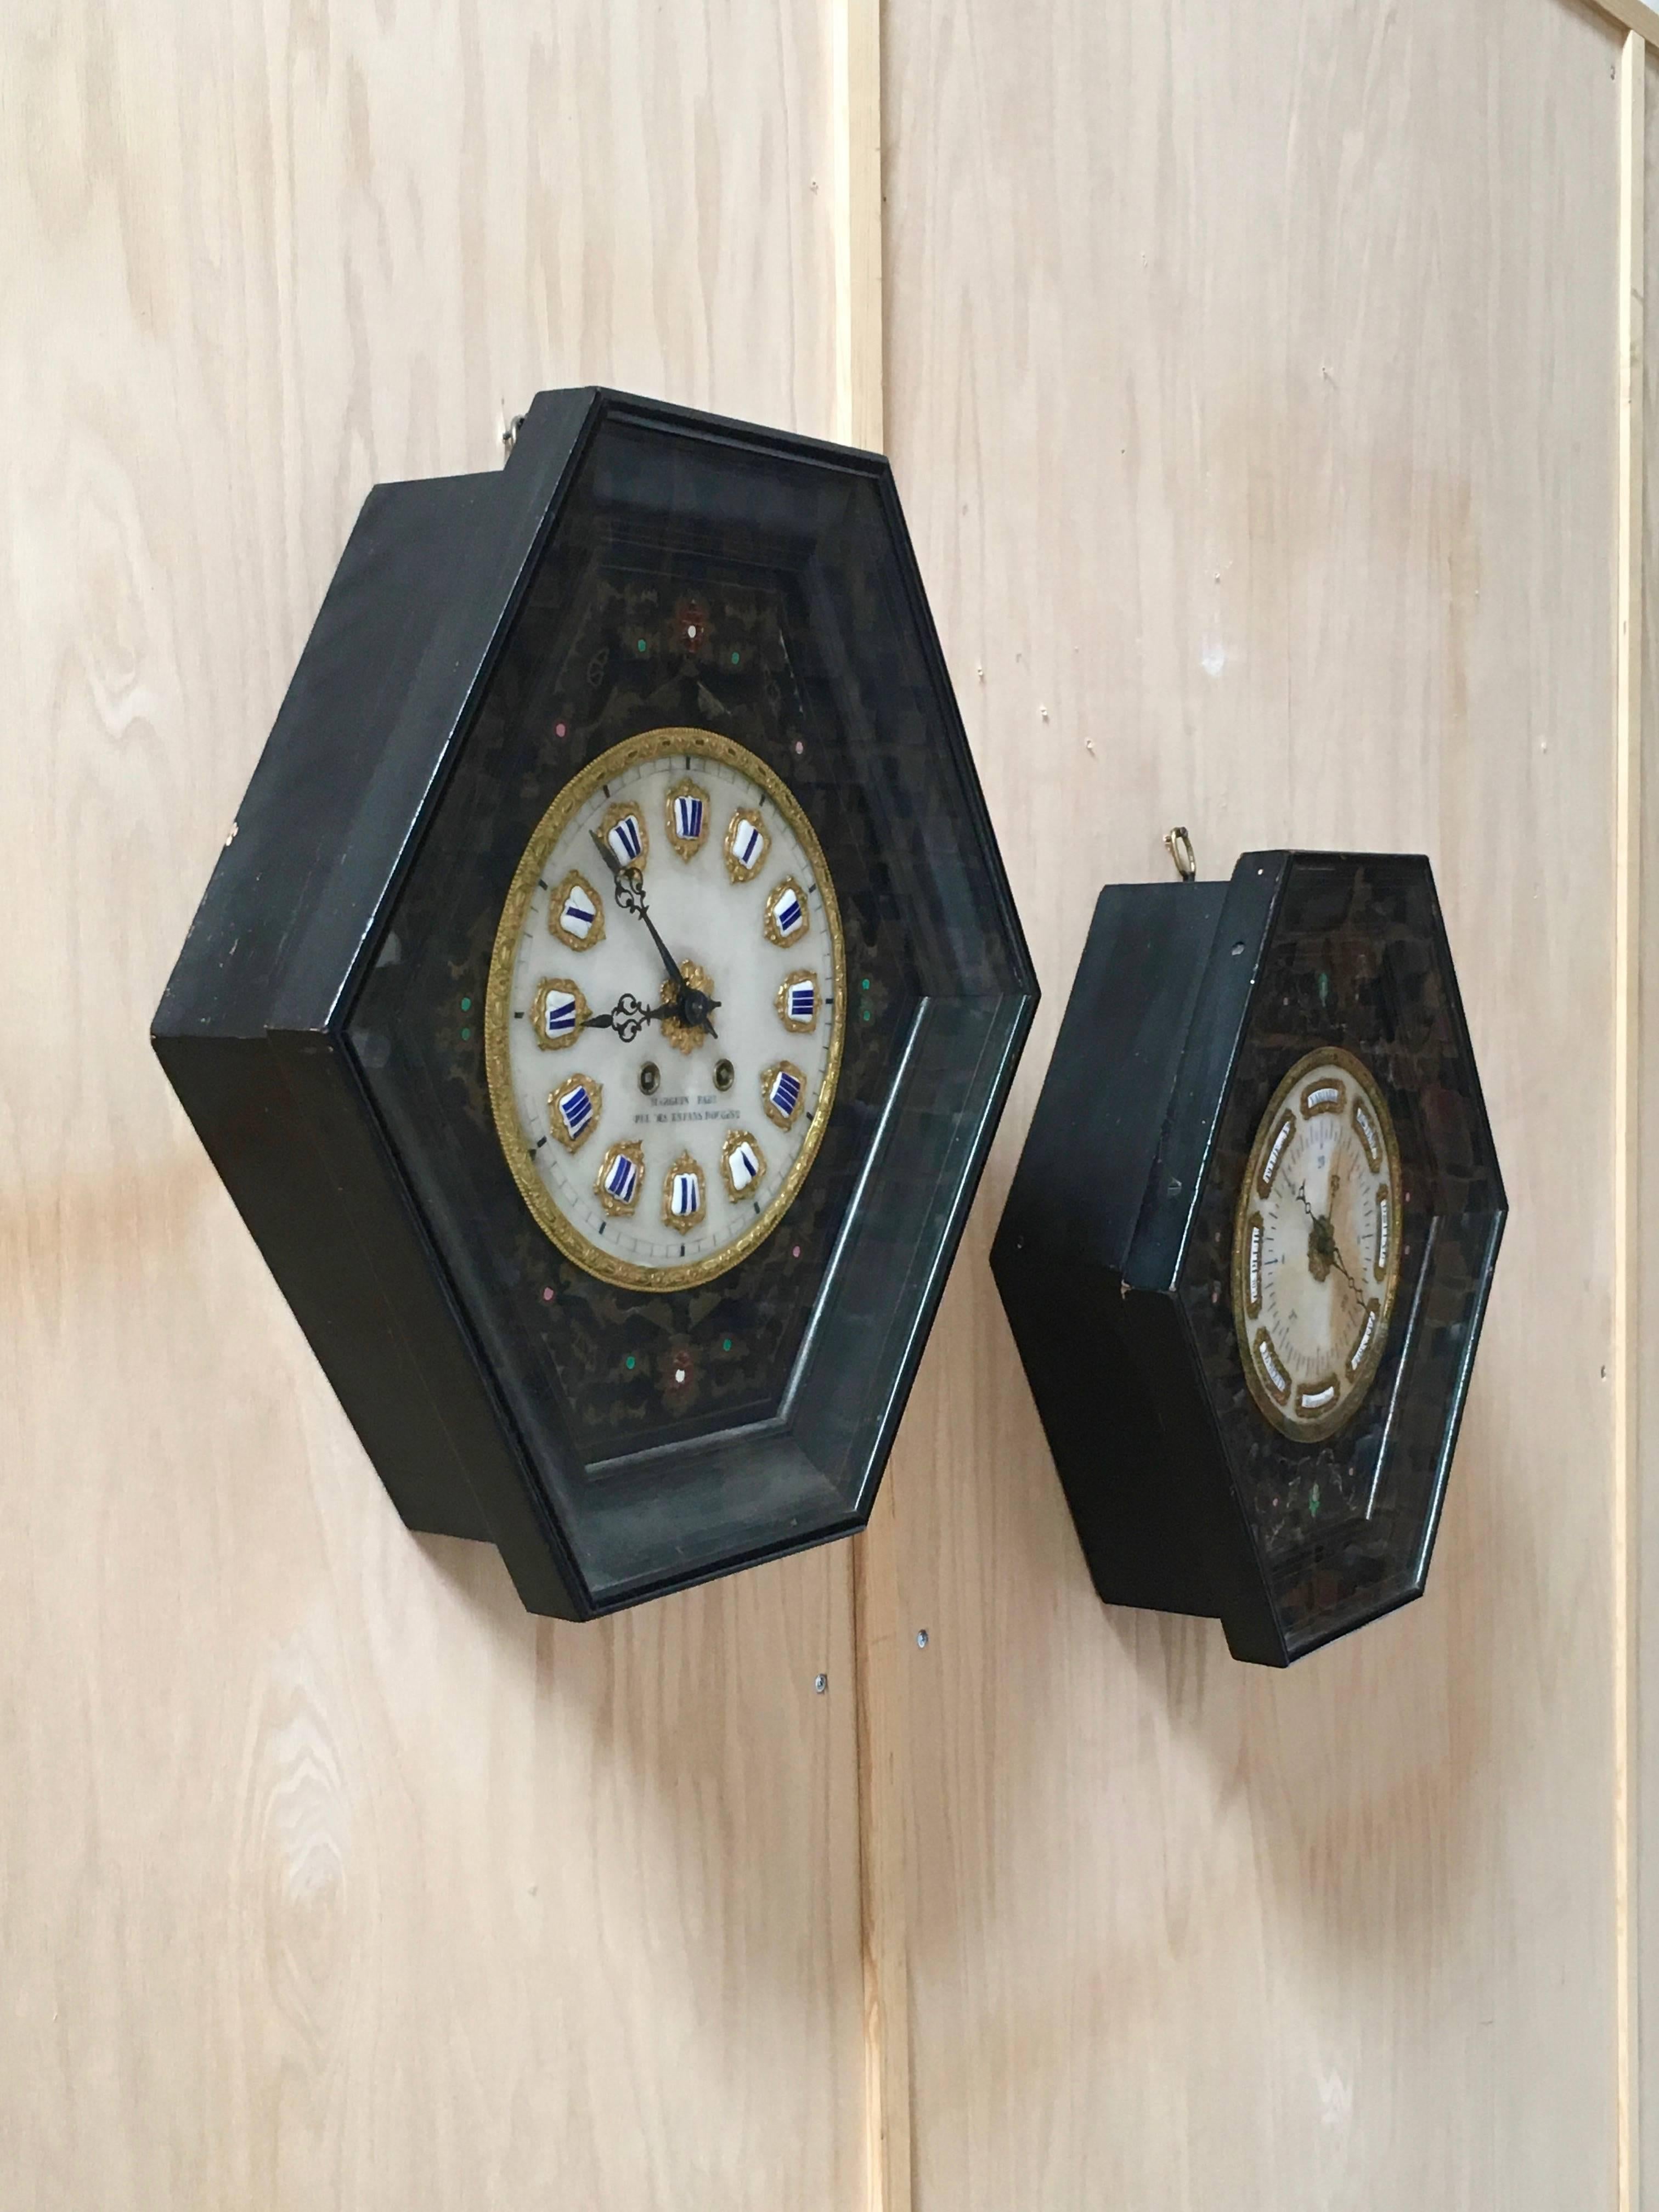 Antique Napoleon III clock and barometer set with Alabaster dials and porcelain and gilt metal cartouches The clock is a 8 day movement that strikes a gong at the hour and half hour The original retailer
Marguin at Rue Des Enfant Rouges 2 Paris.